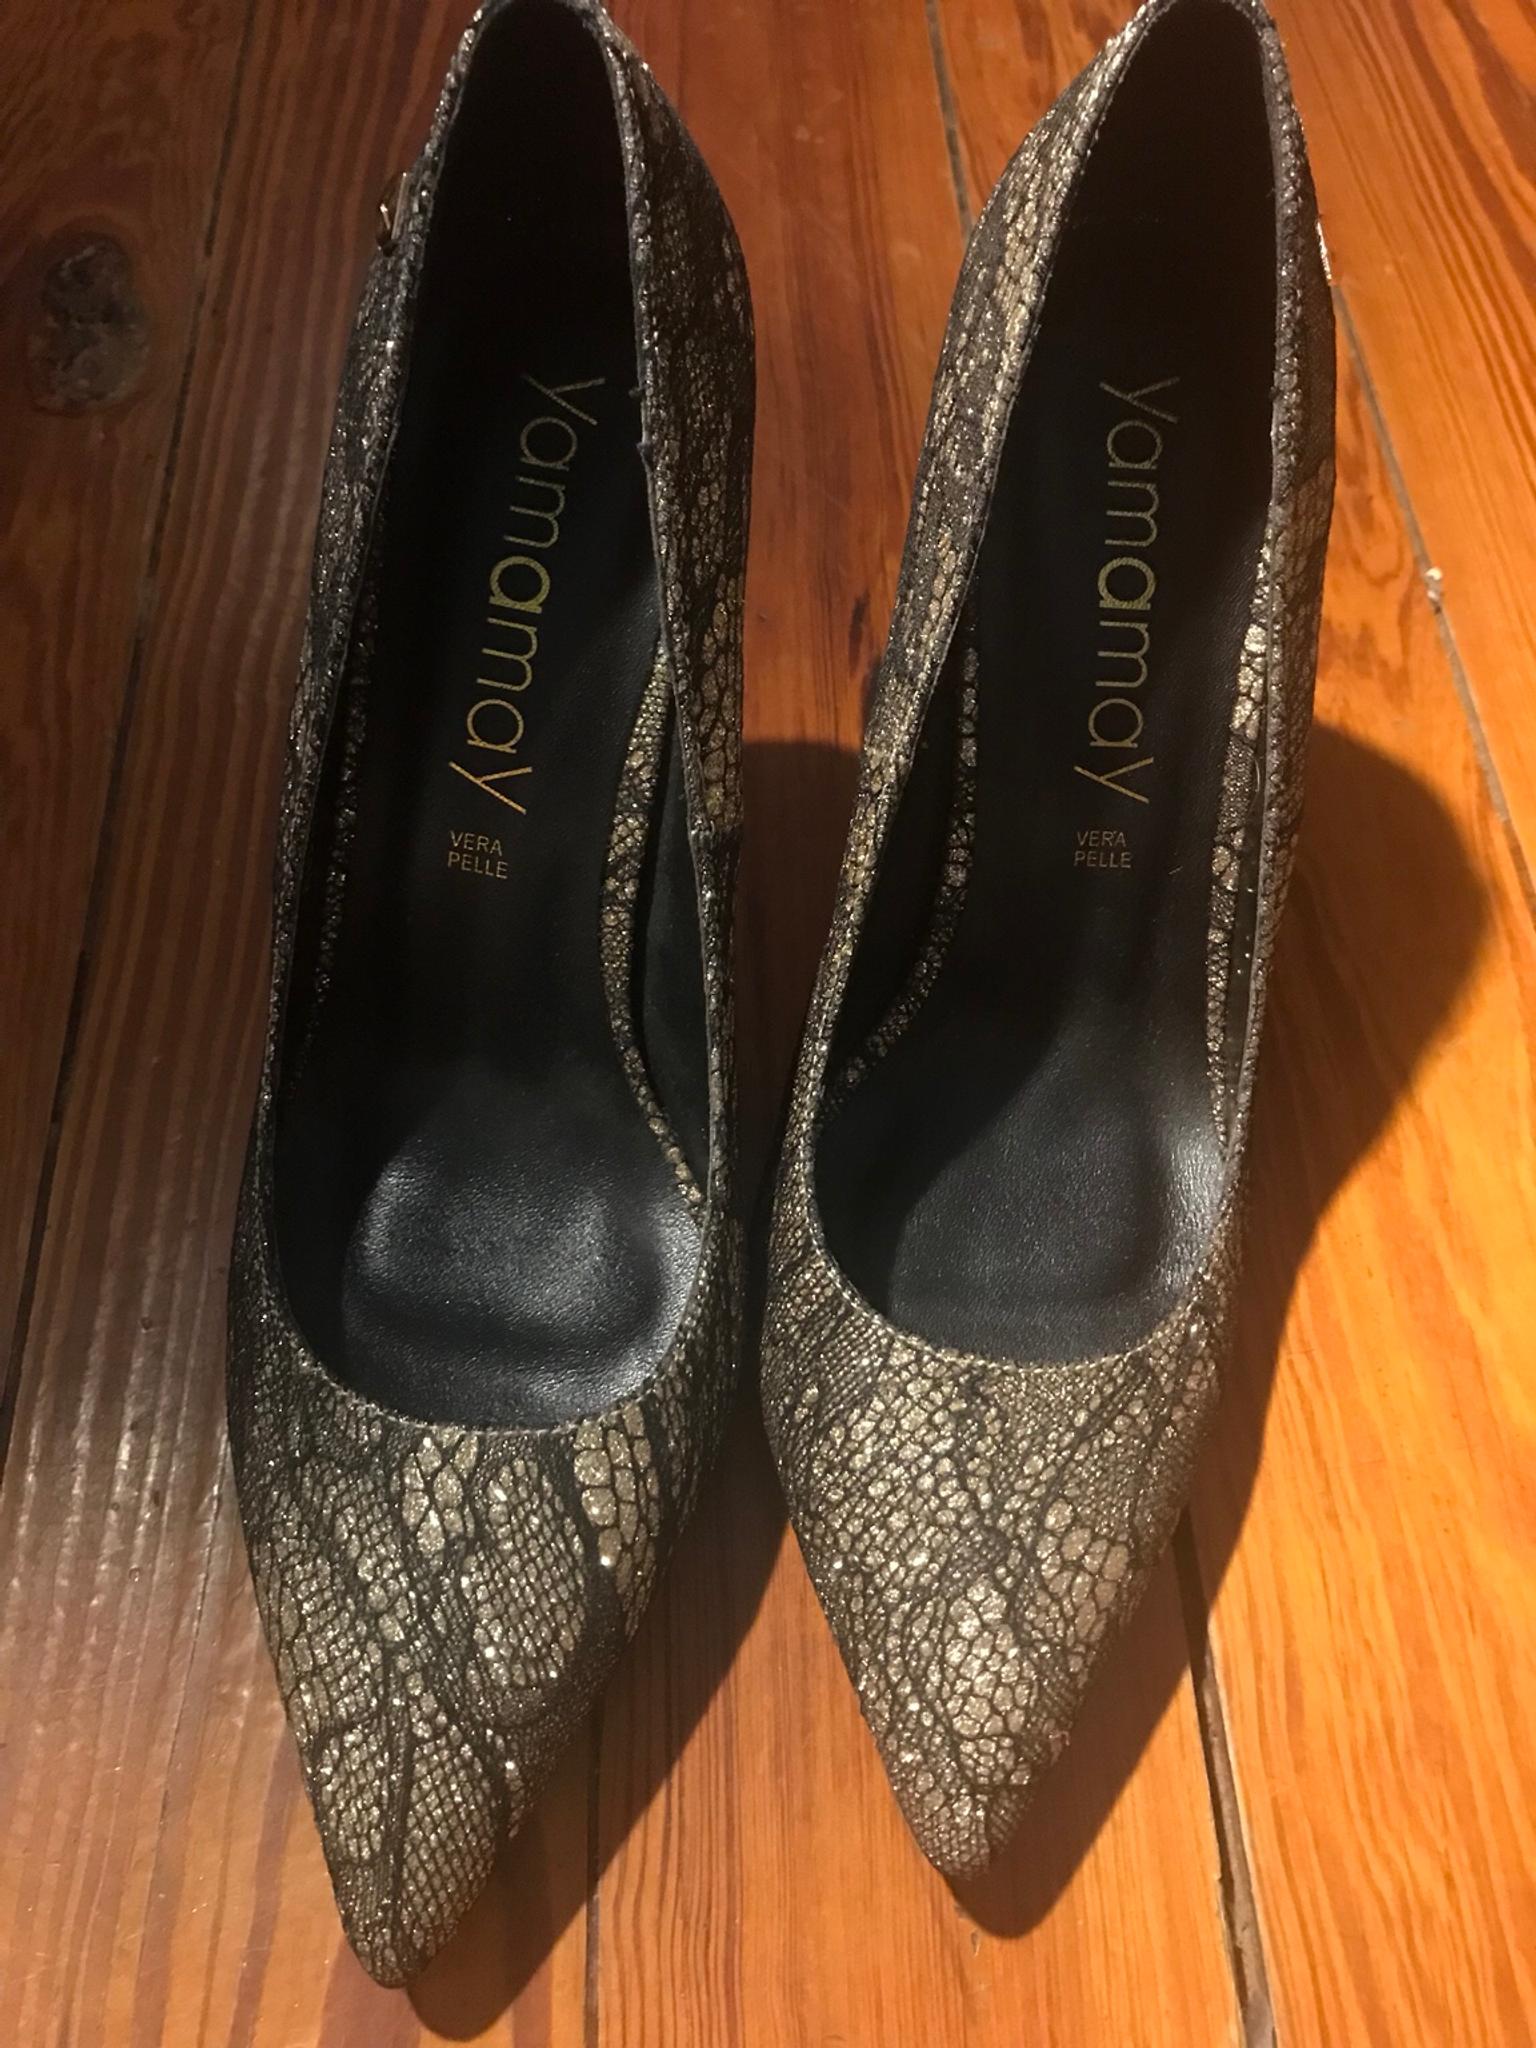 Scarpe con tacco Yamamay in 12024 Moncalieri for €30.00 for sale | Shpock